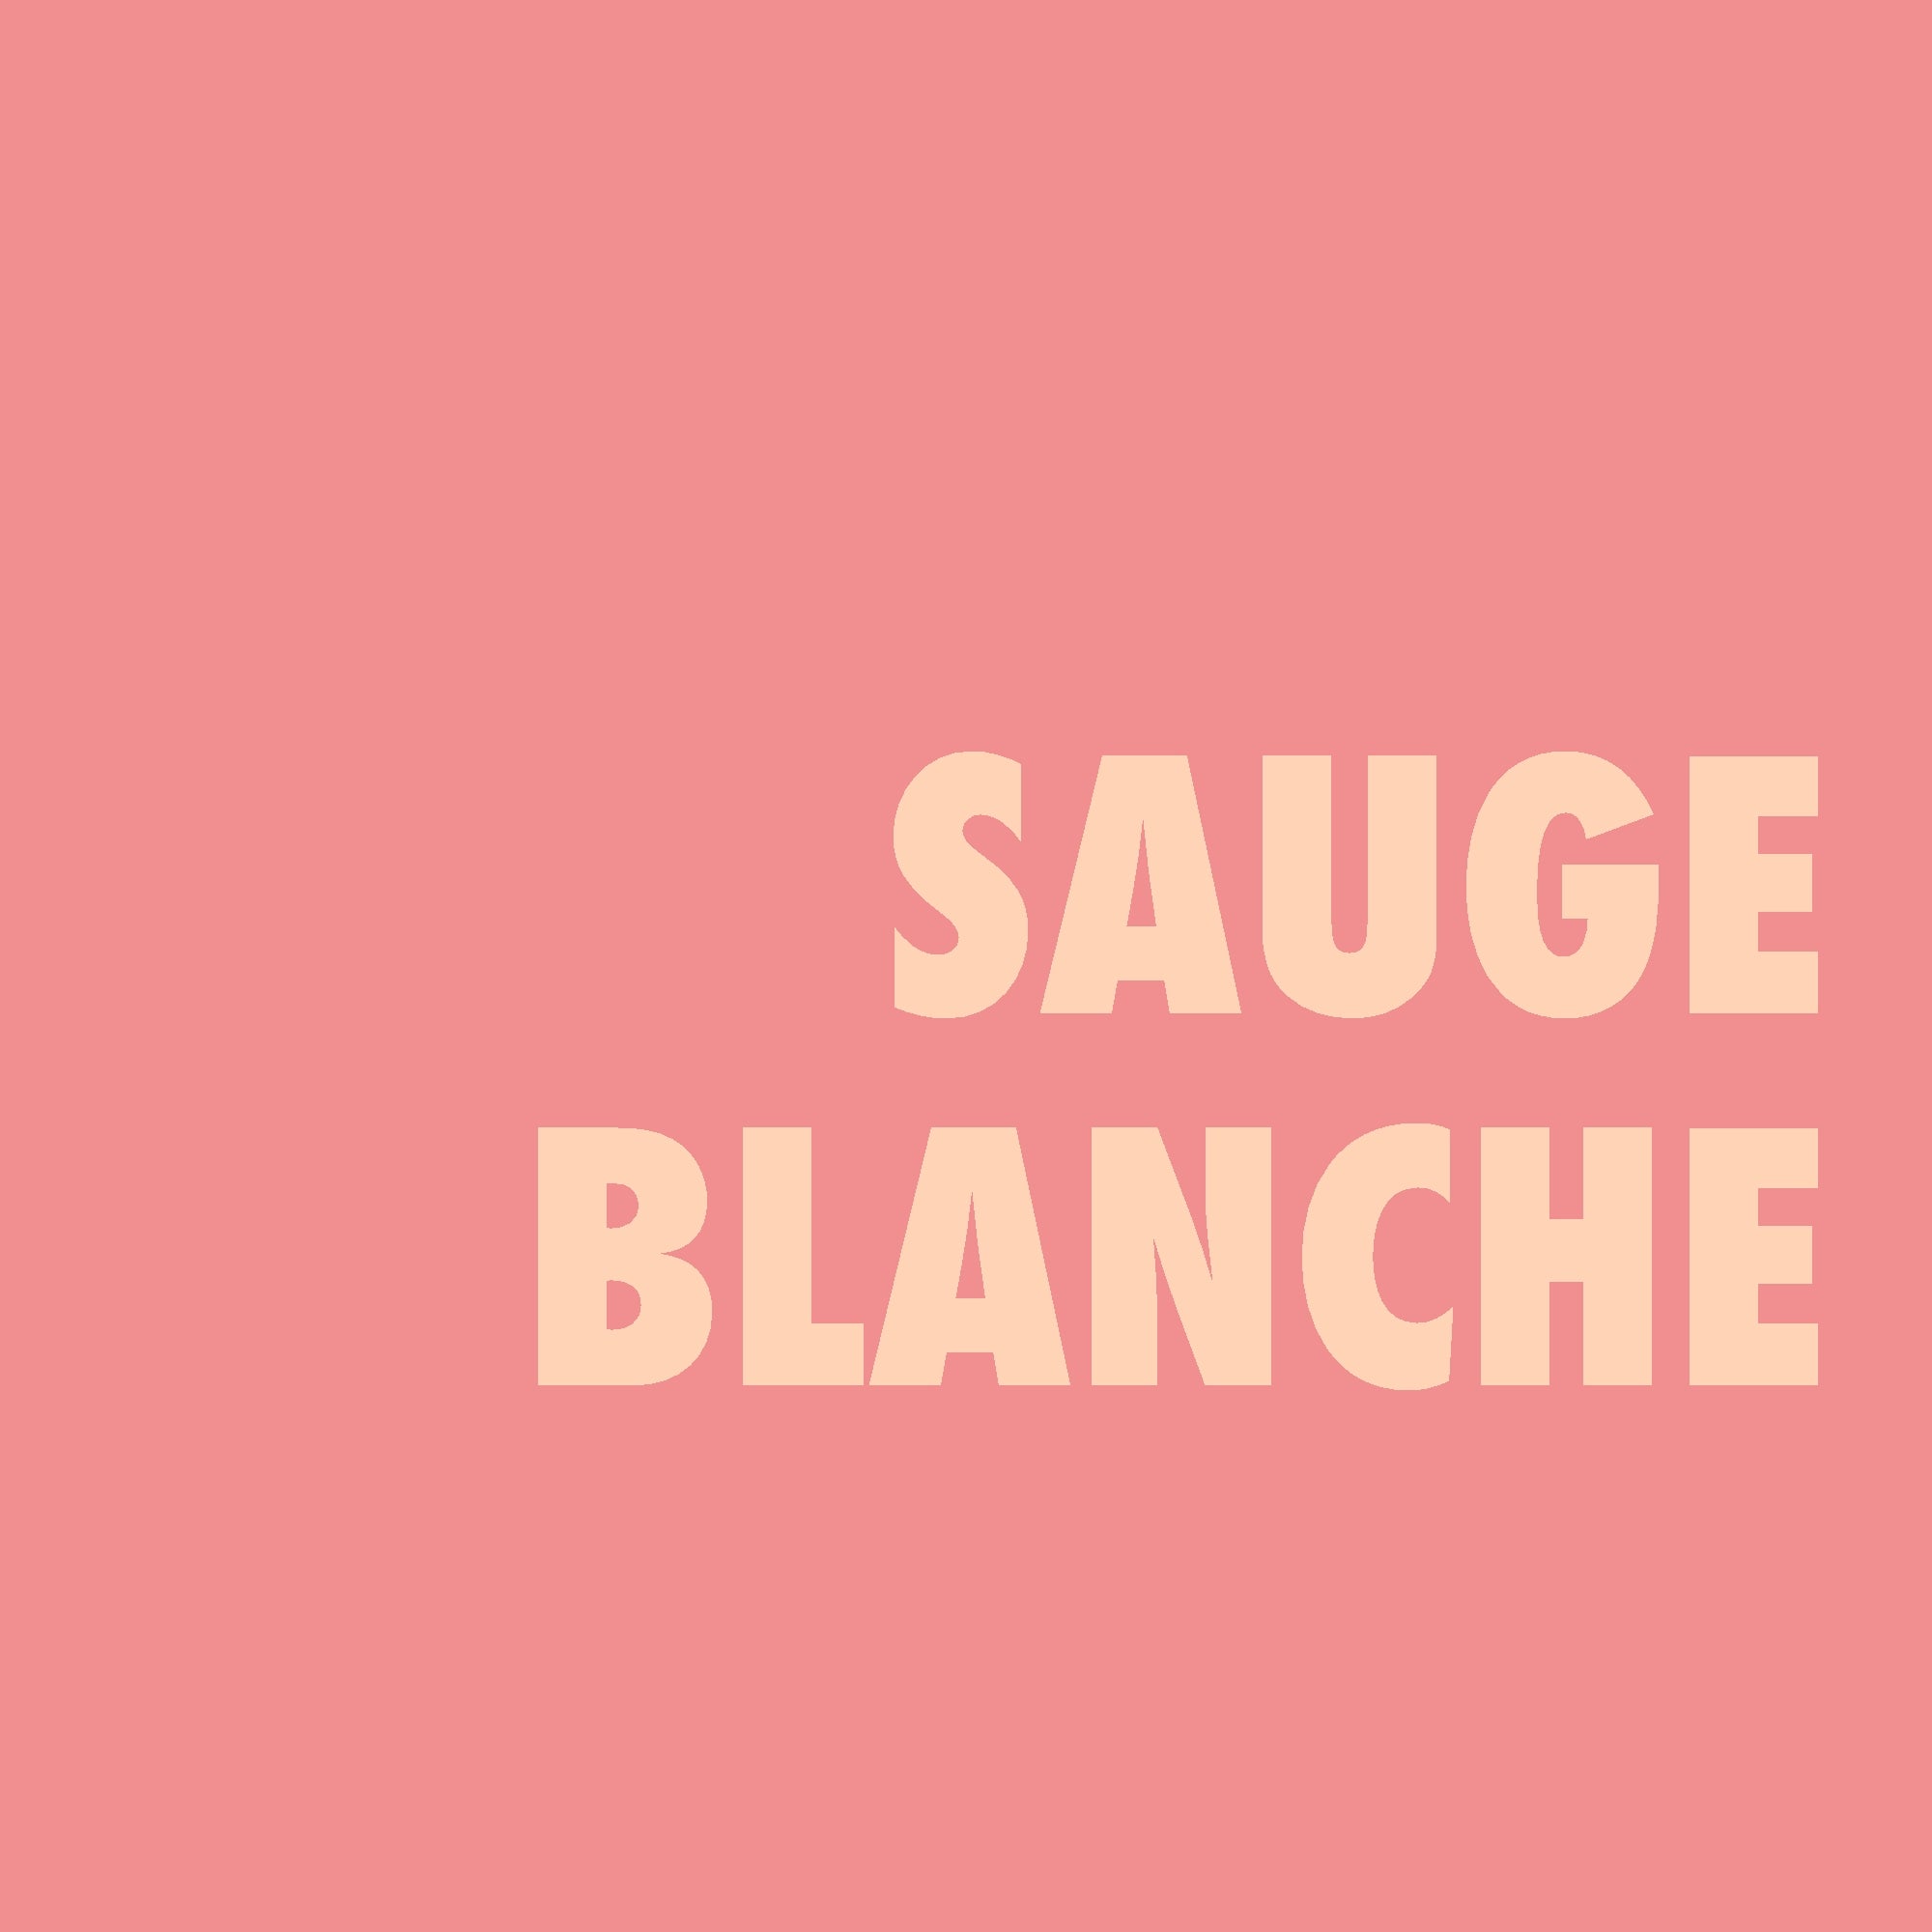 Sauge blanche